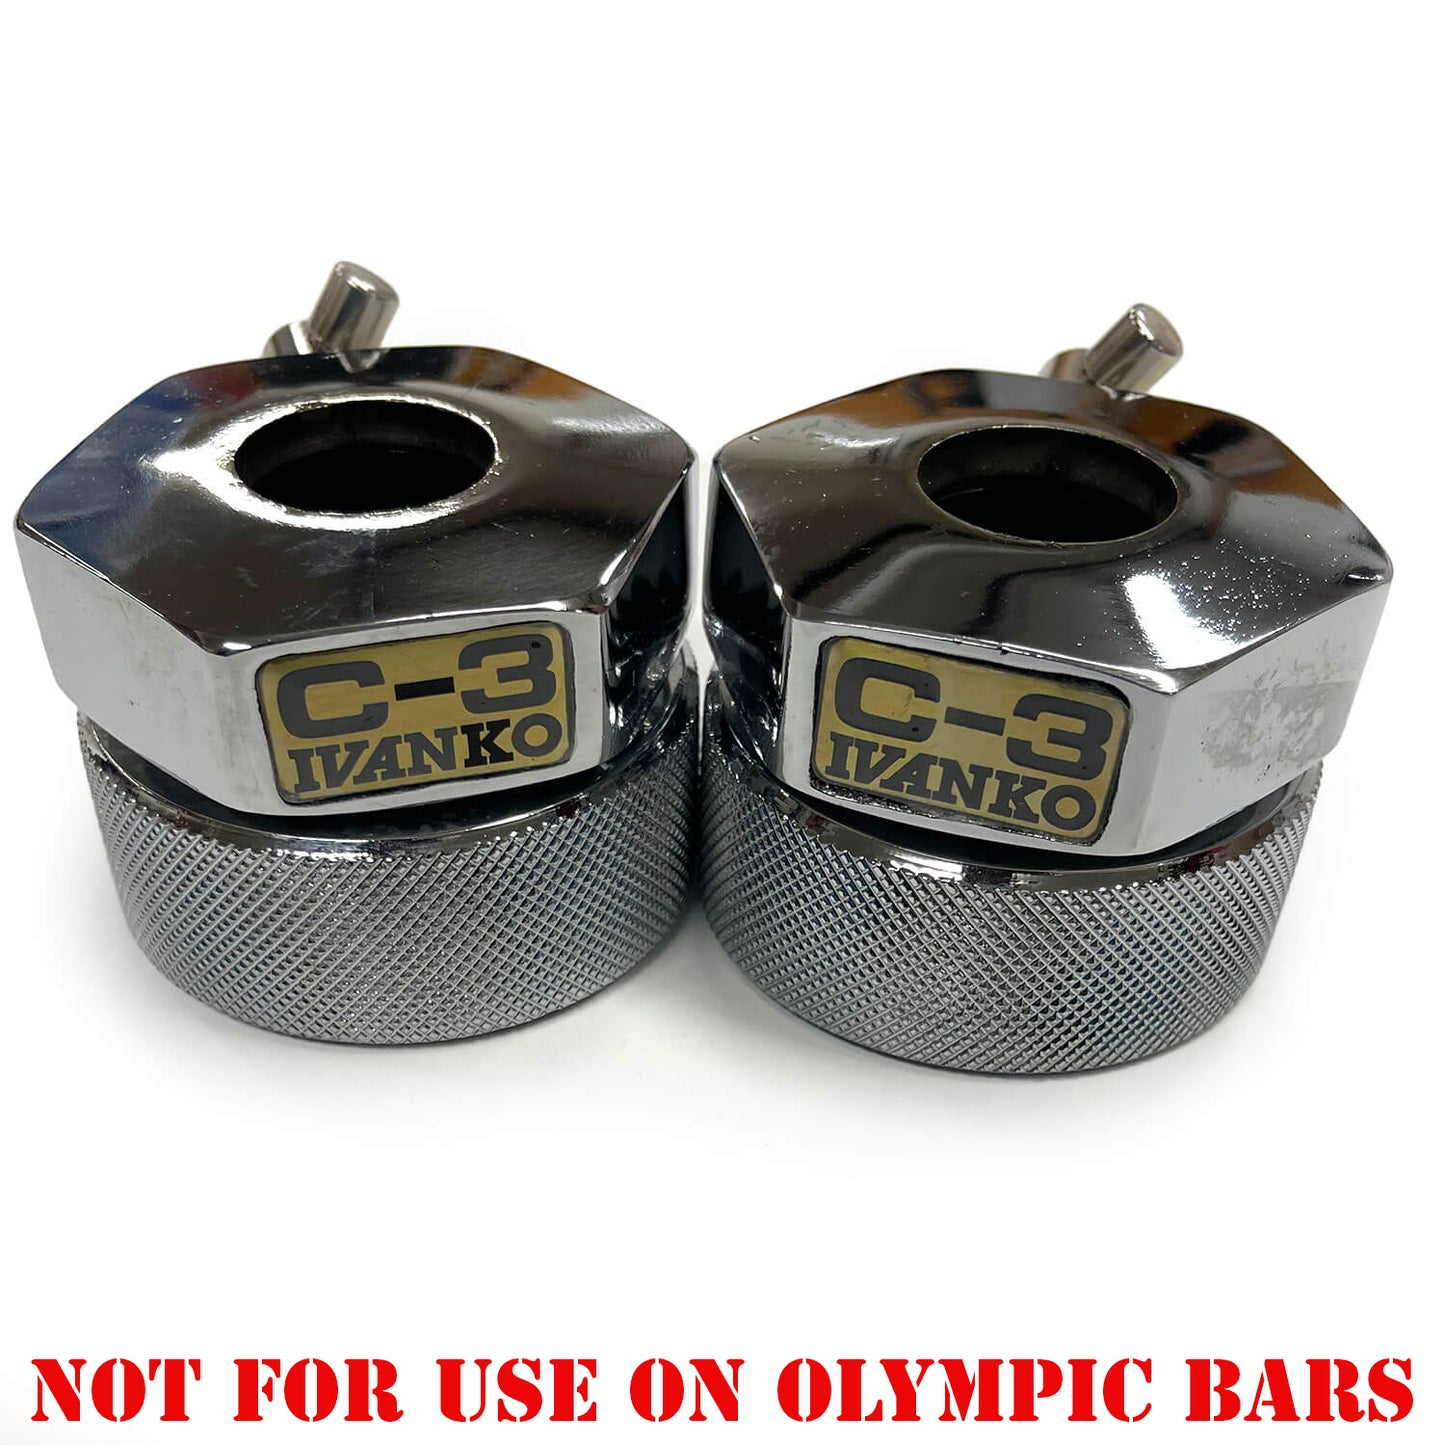 IVANKO-CHROME-C-3-COMPRESSION-COLLAR-NOT-FOR-OLYMPIC-BARS